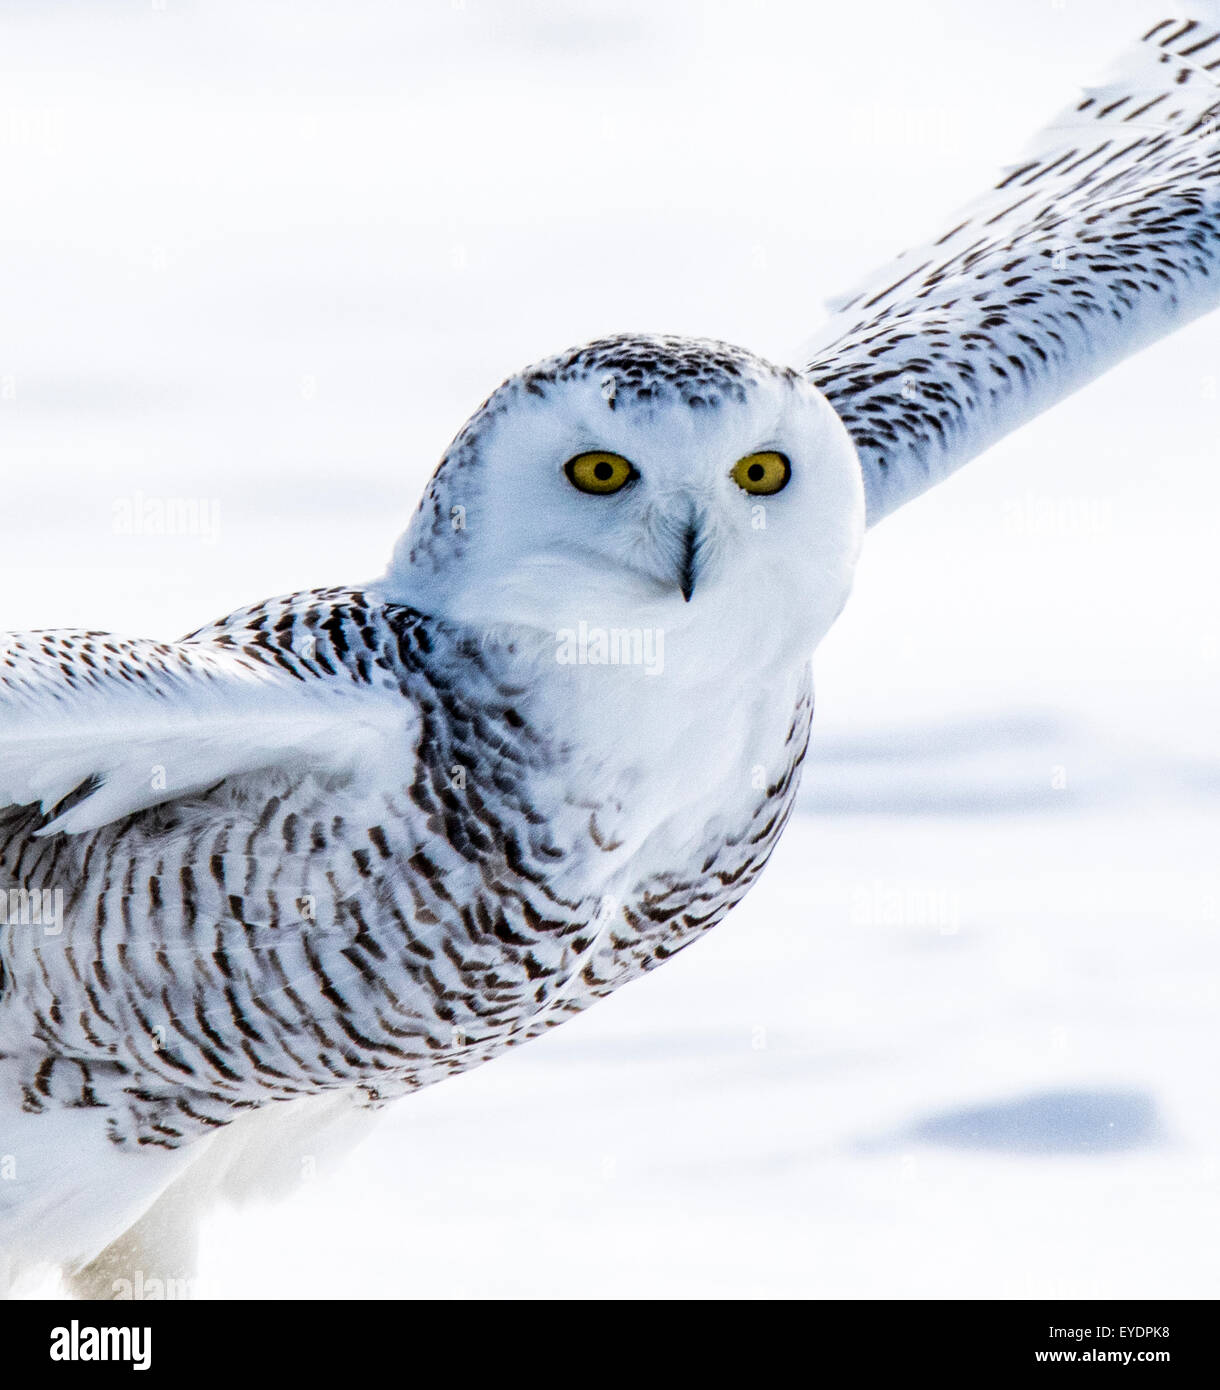 Snowy owl hunting over a winter field Stock Photo